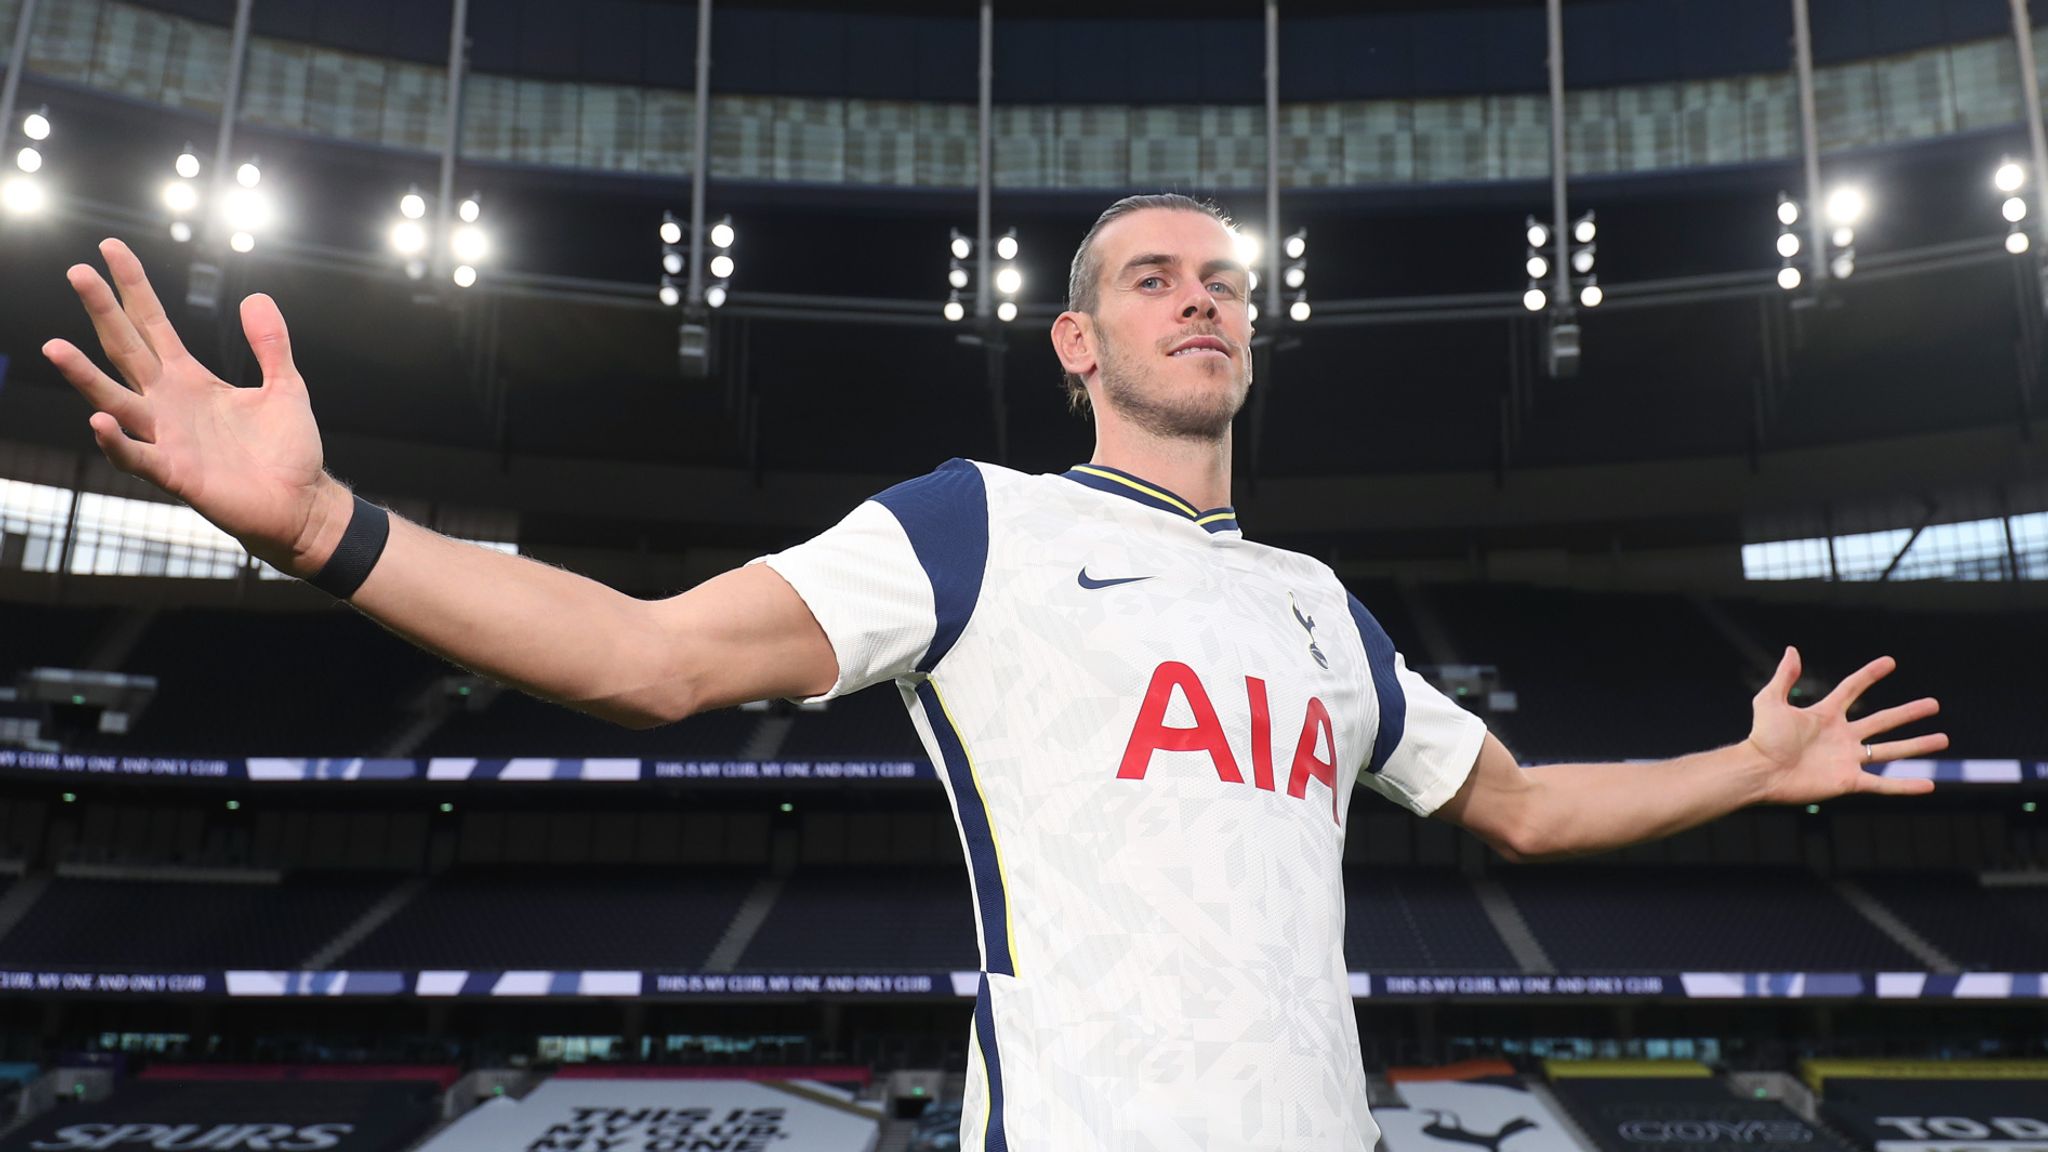 Tottenham hero Gareth Bale is about to discover if his biggest